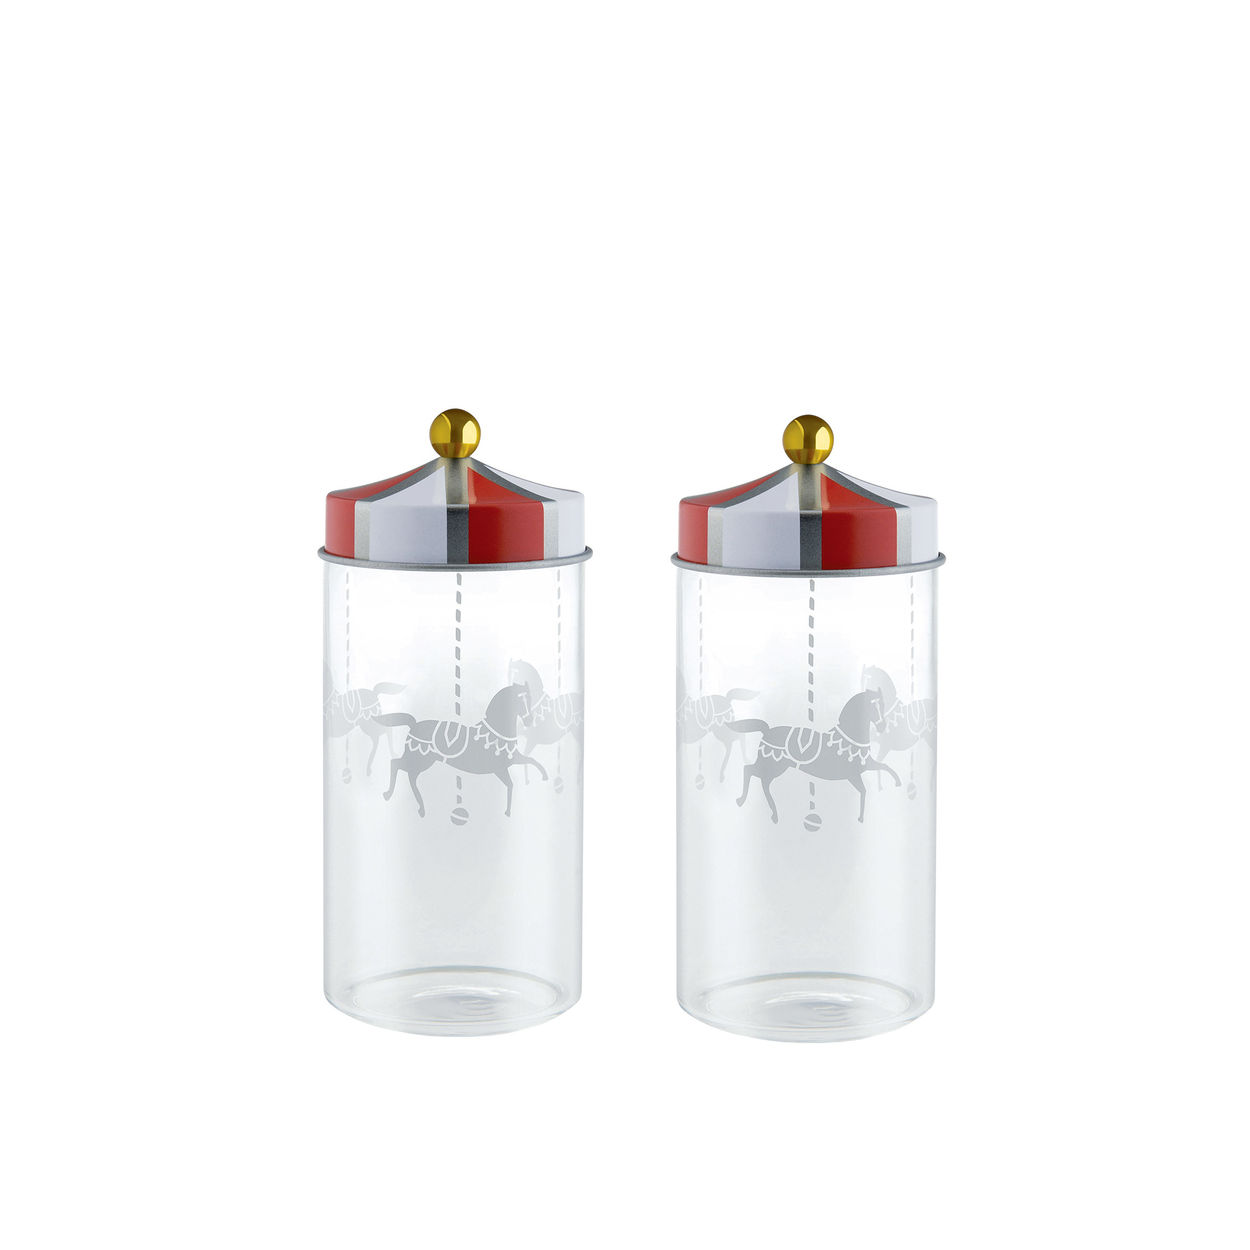 Alessi Circus Glass Spice Jars - Set of 2